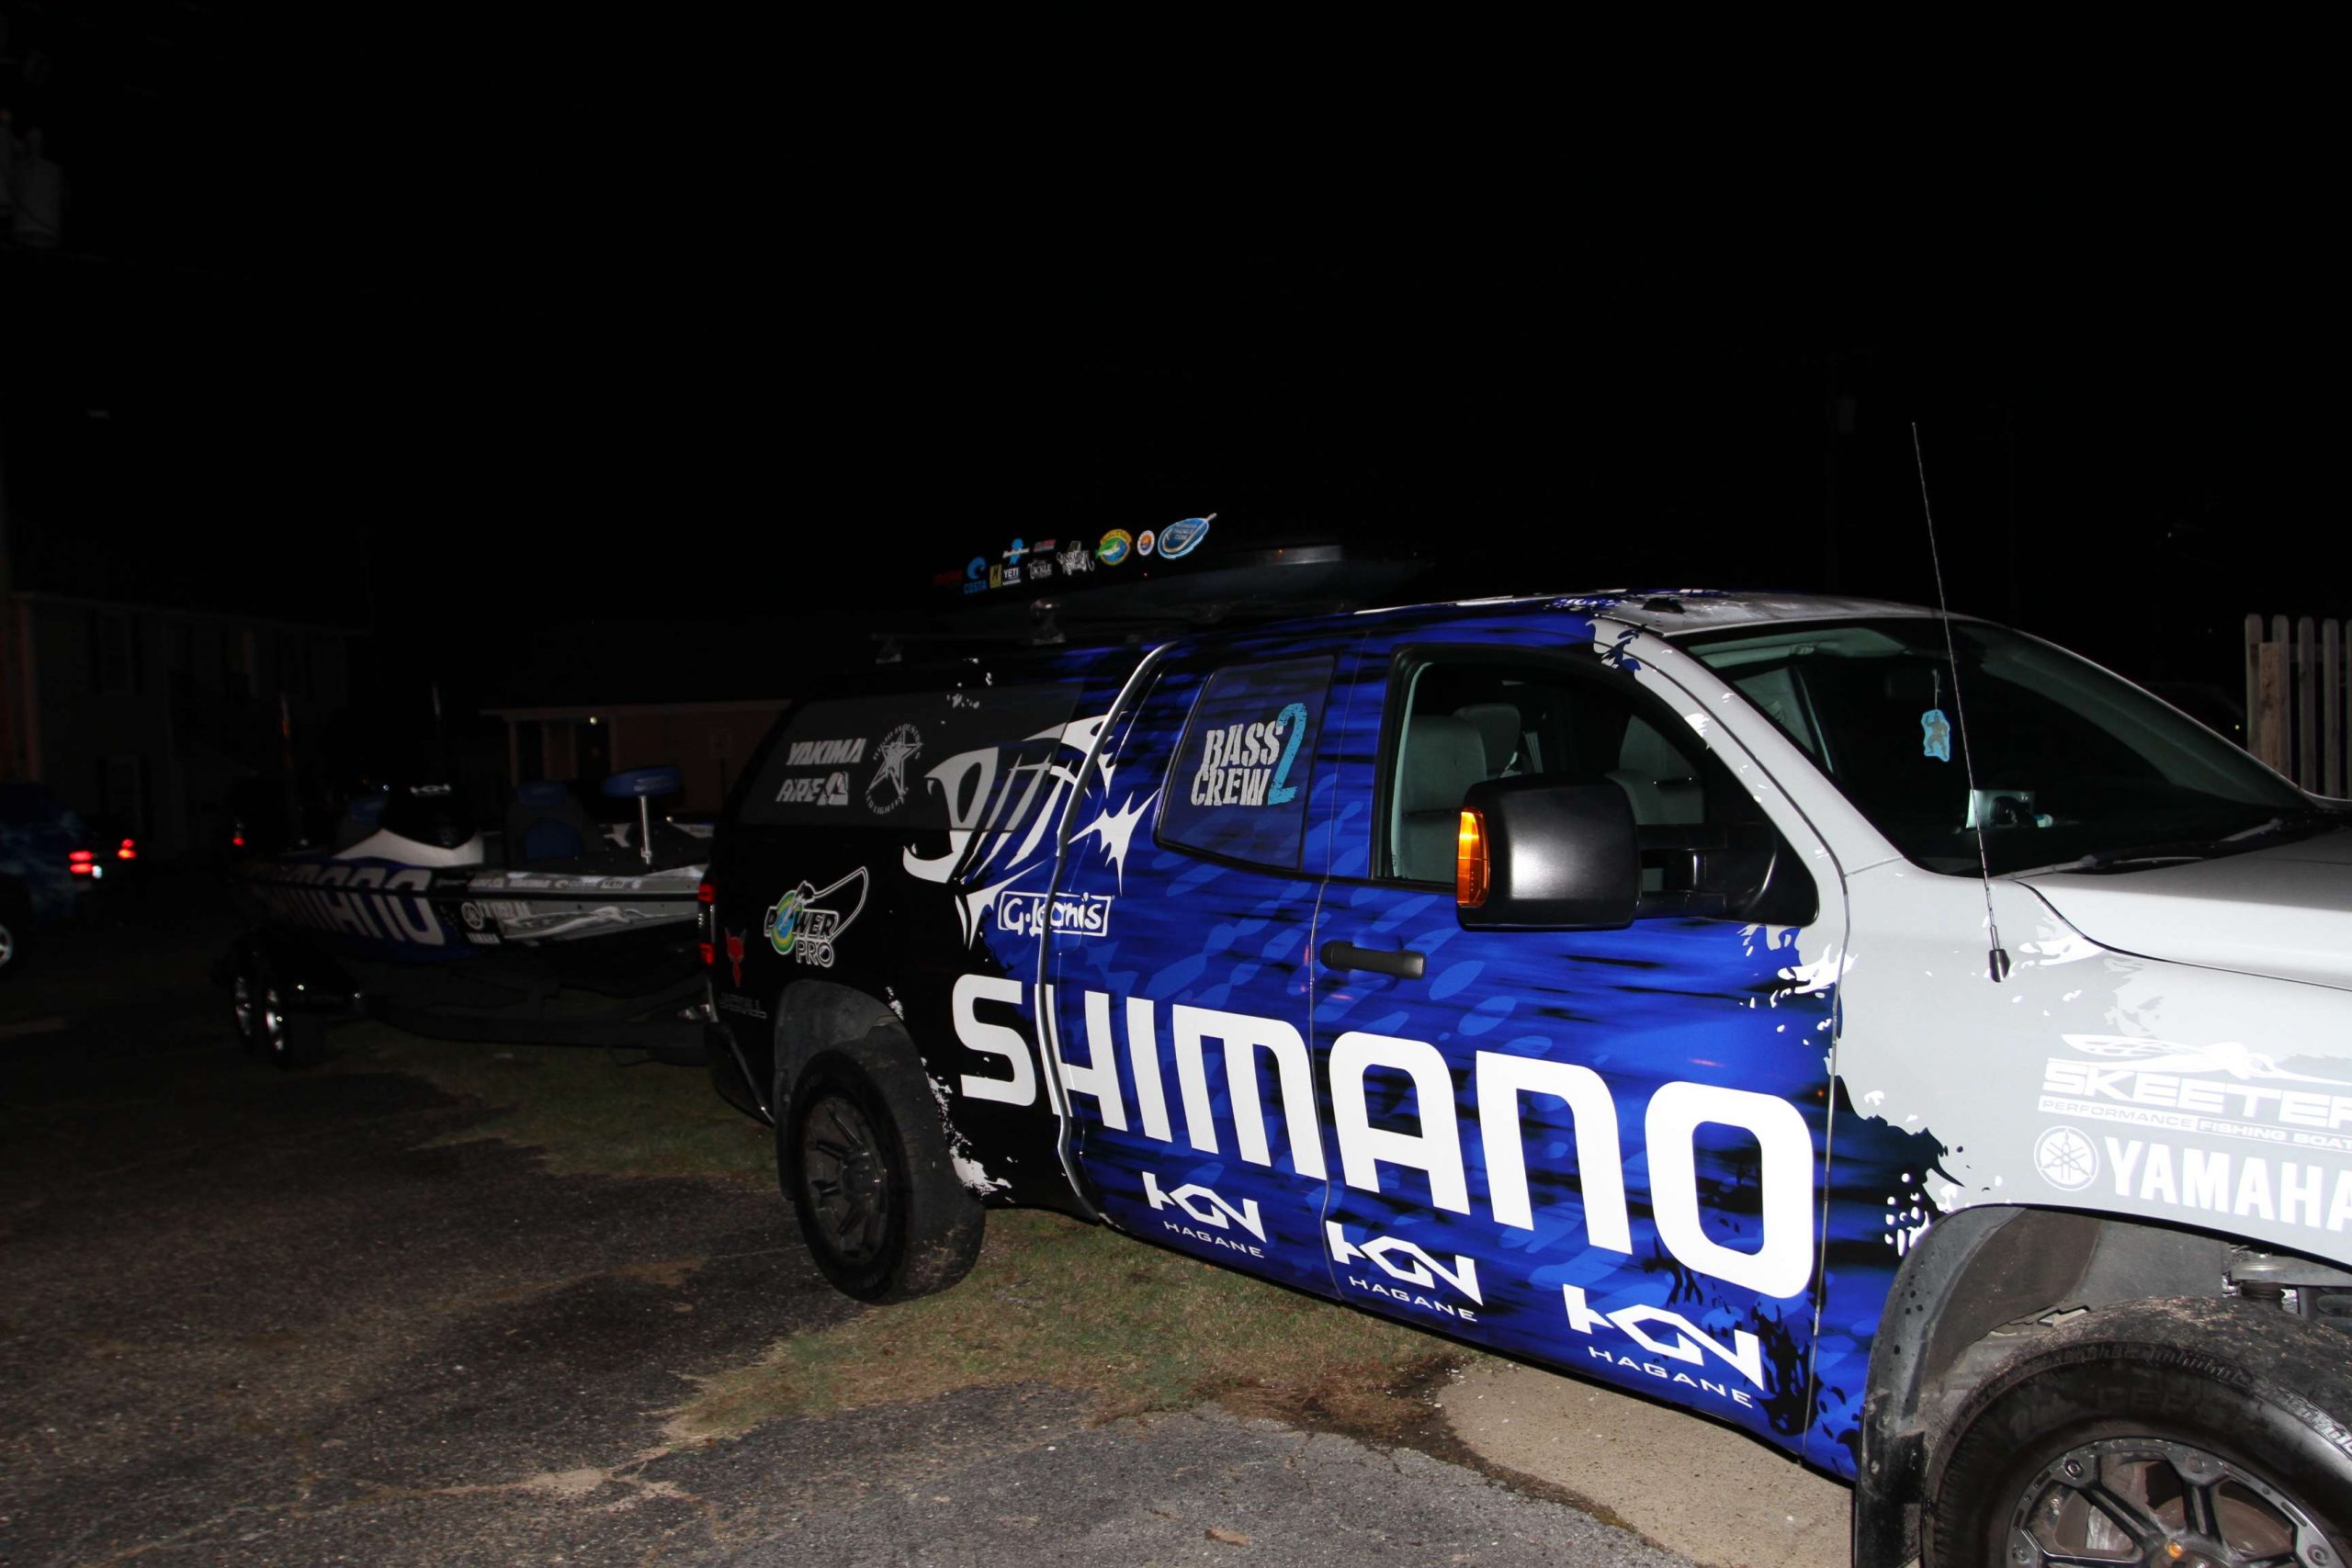 A Shimano-wrapped truck and boat are on display.